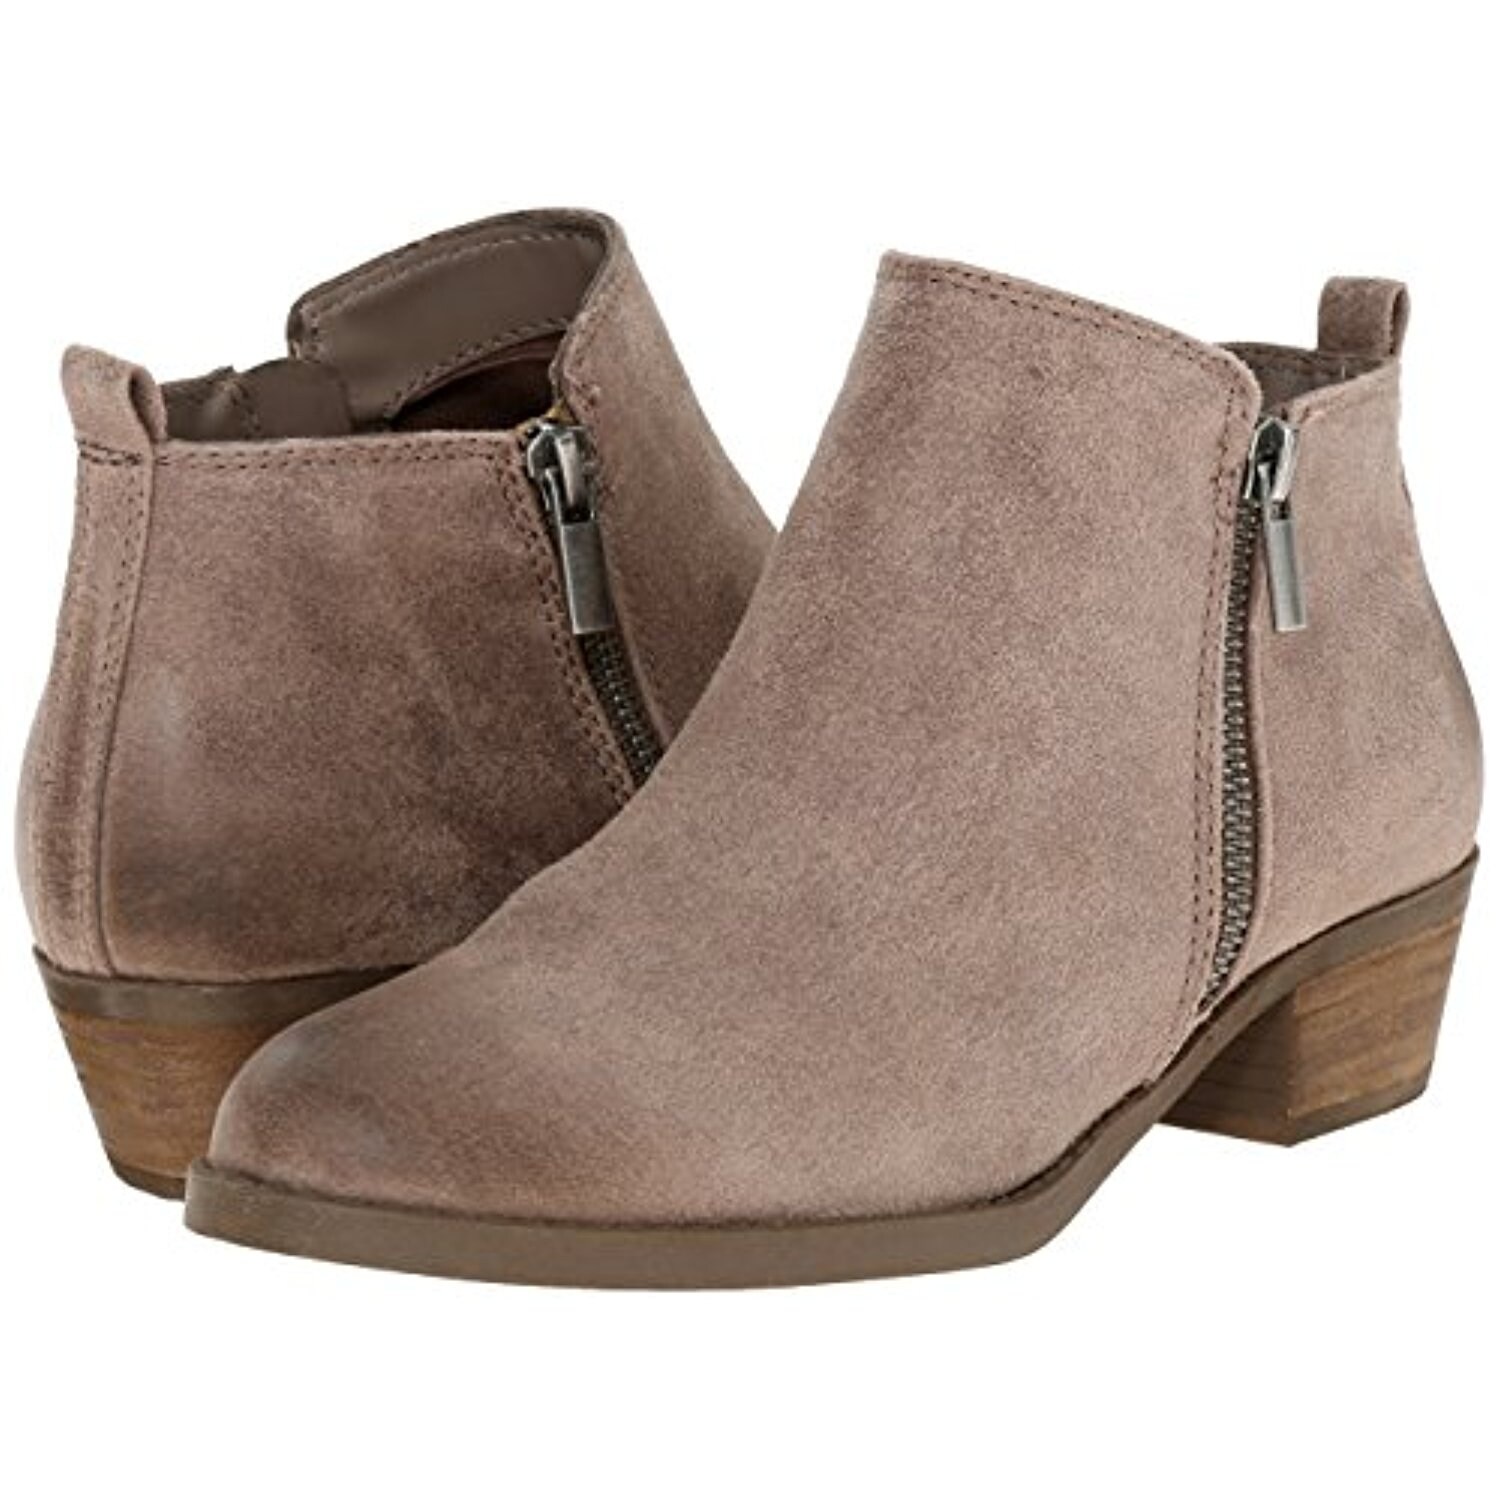 carlos brie ankle boot